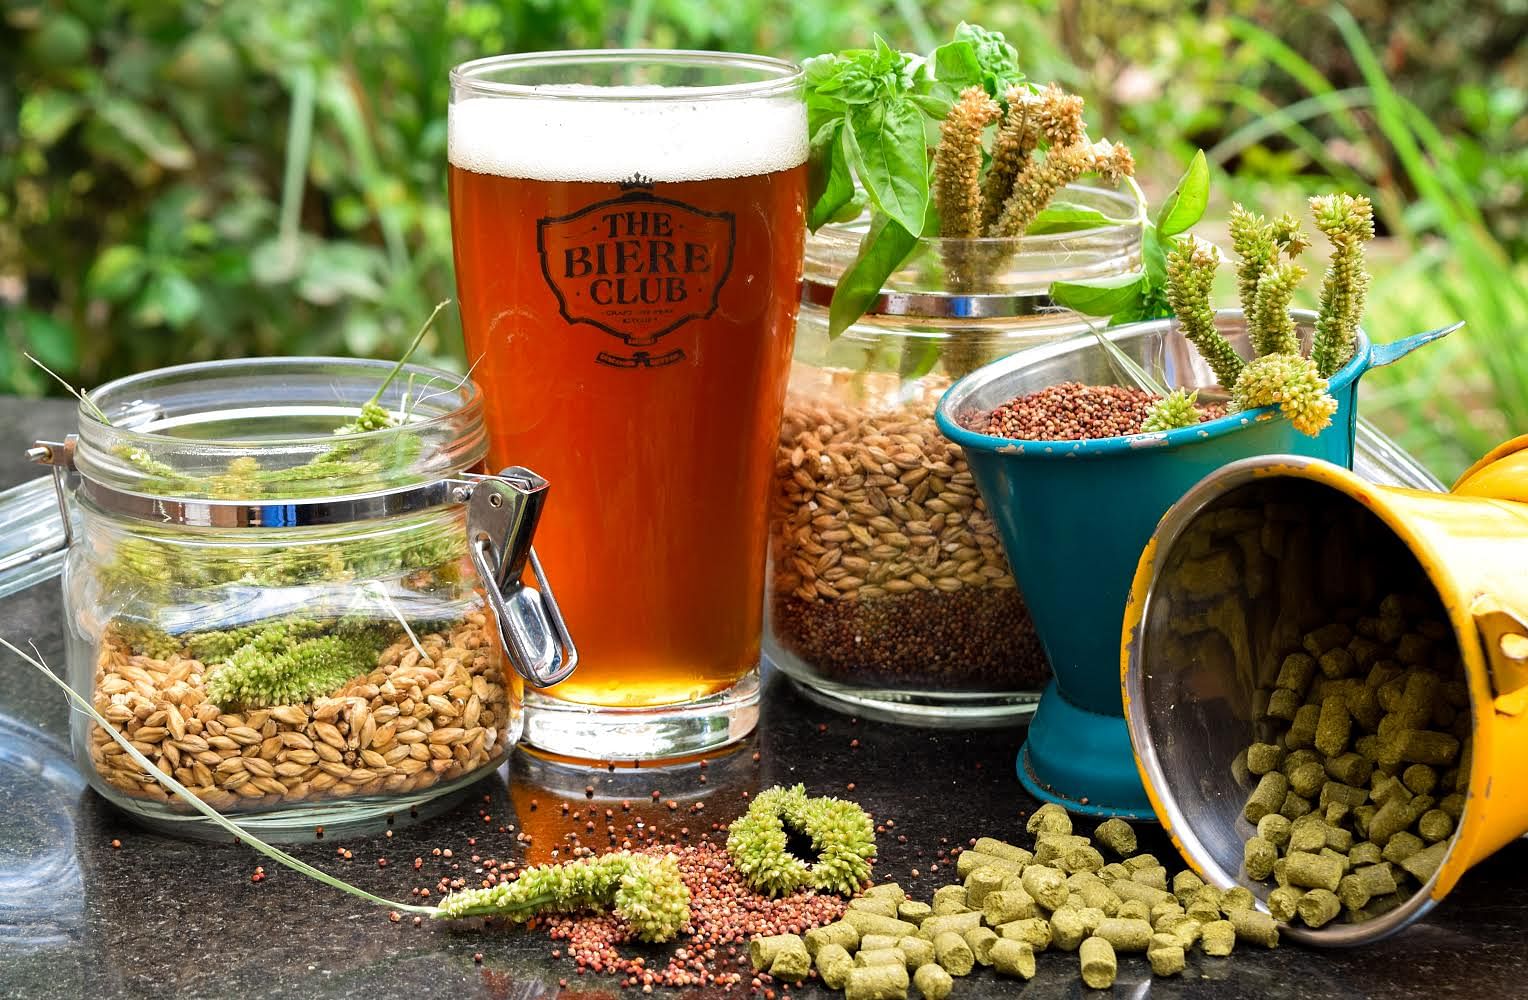 Ragi Beer is on the menu at The Biere Club and other micro-breweries.